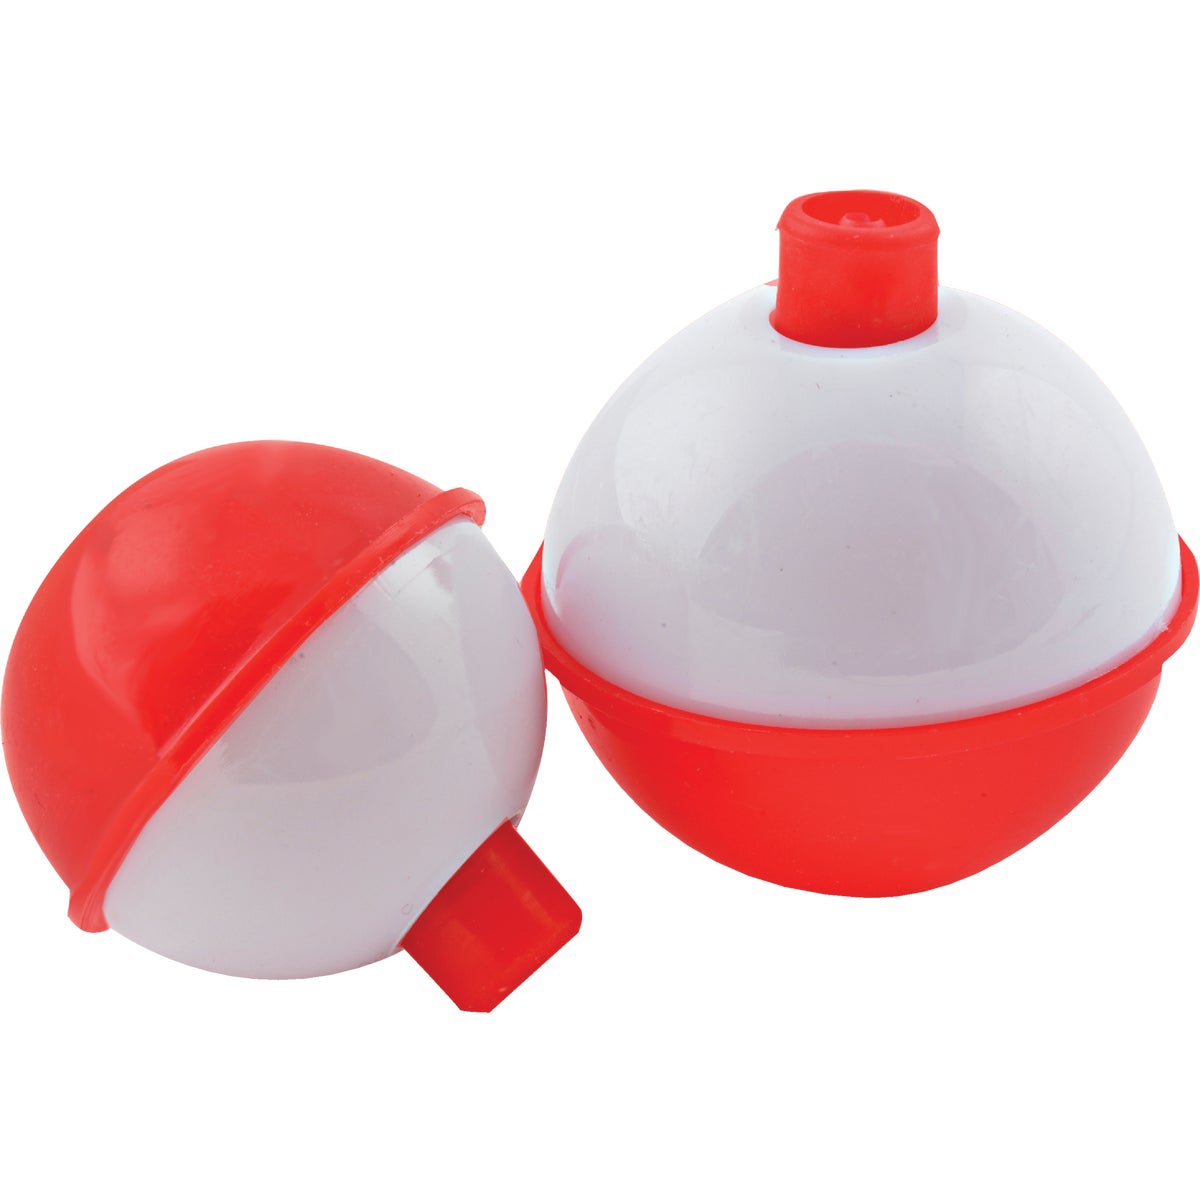 Item 833797, Deluxe quality floats featuring an easy push button.